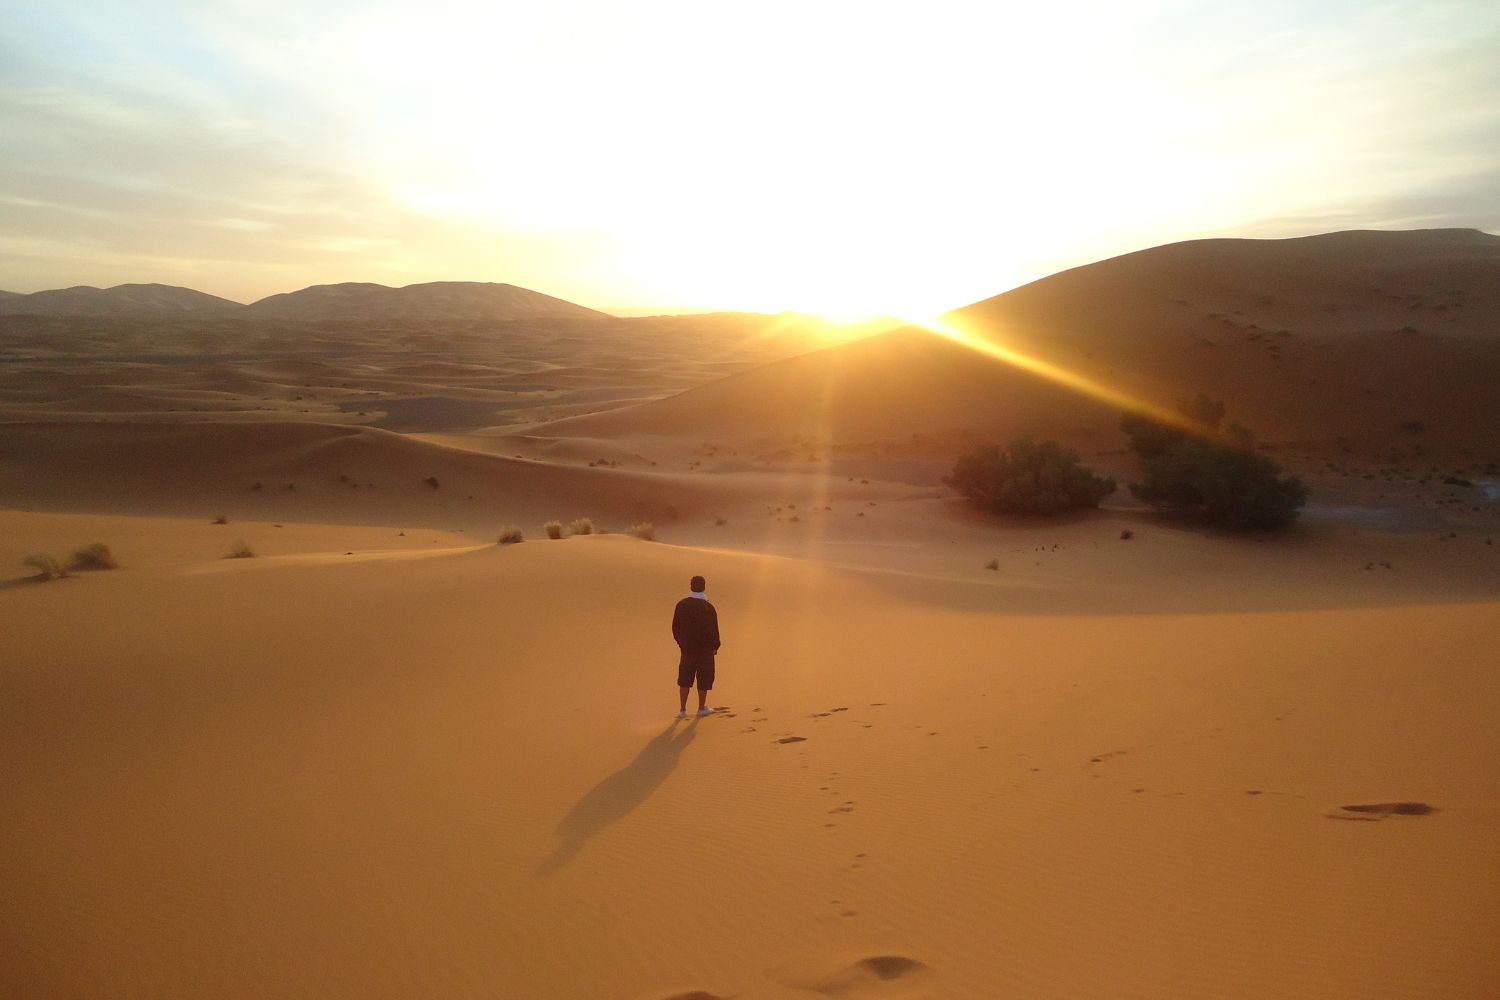 A man standing in the dessert during daylight